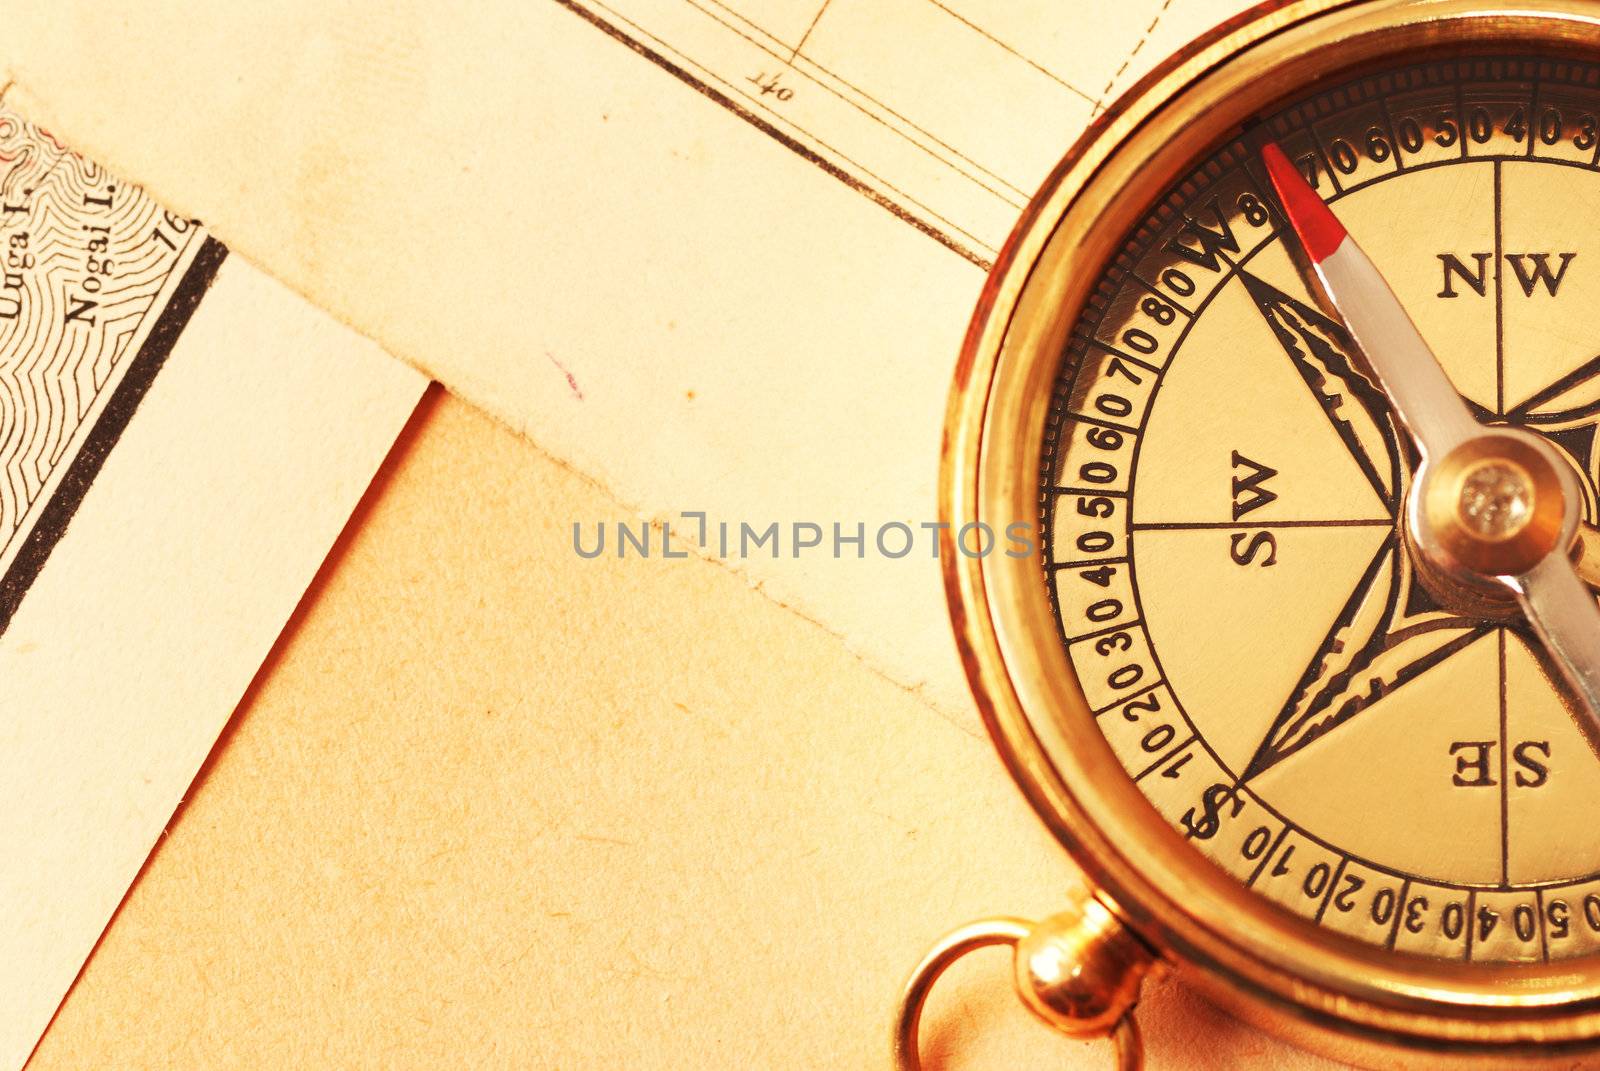 Antique brass compass over old map by haveseen